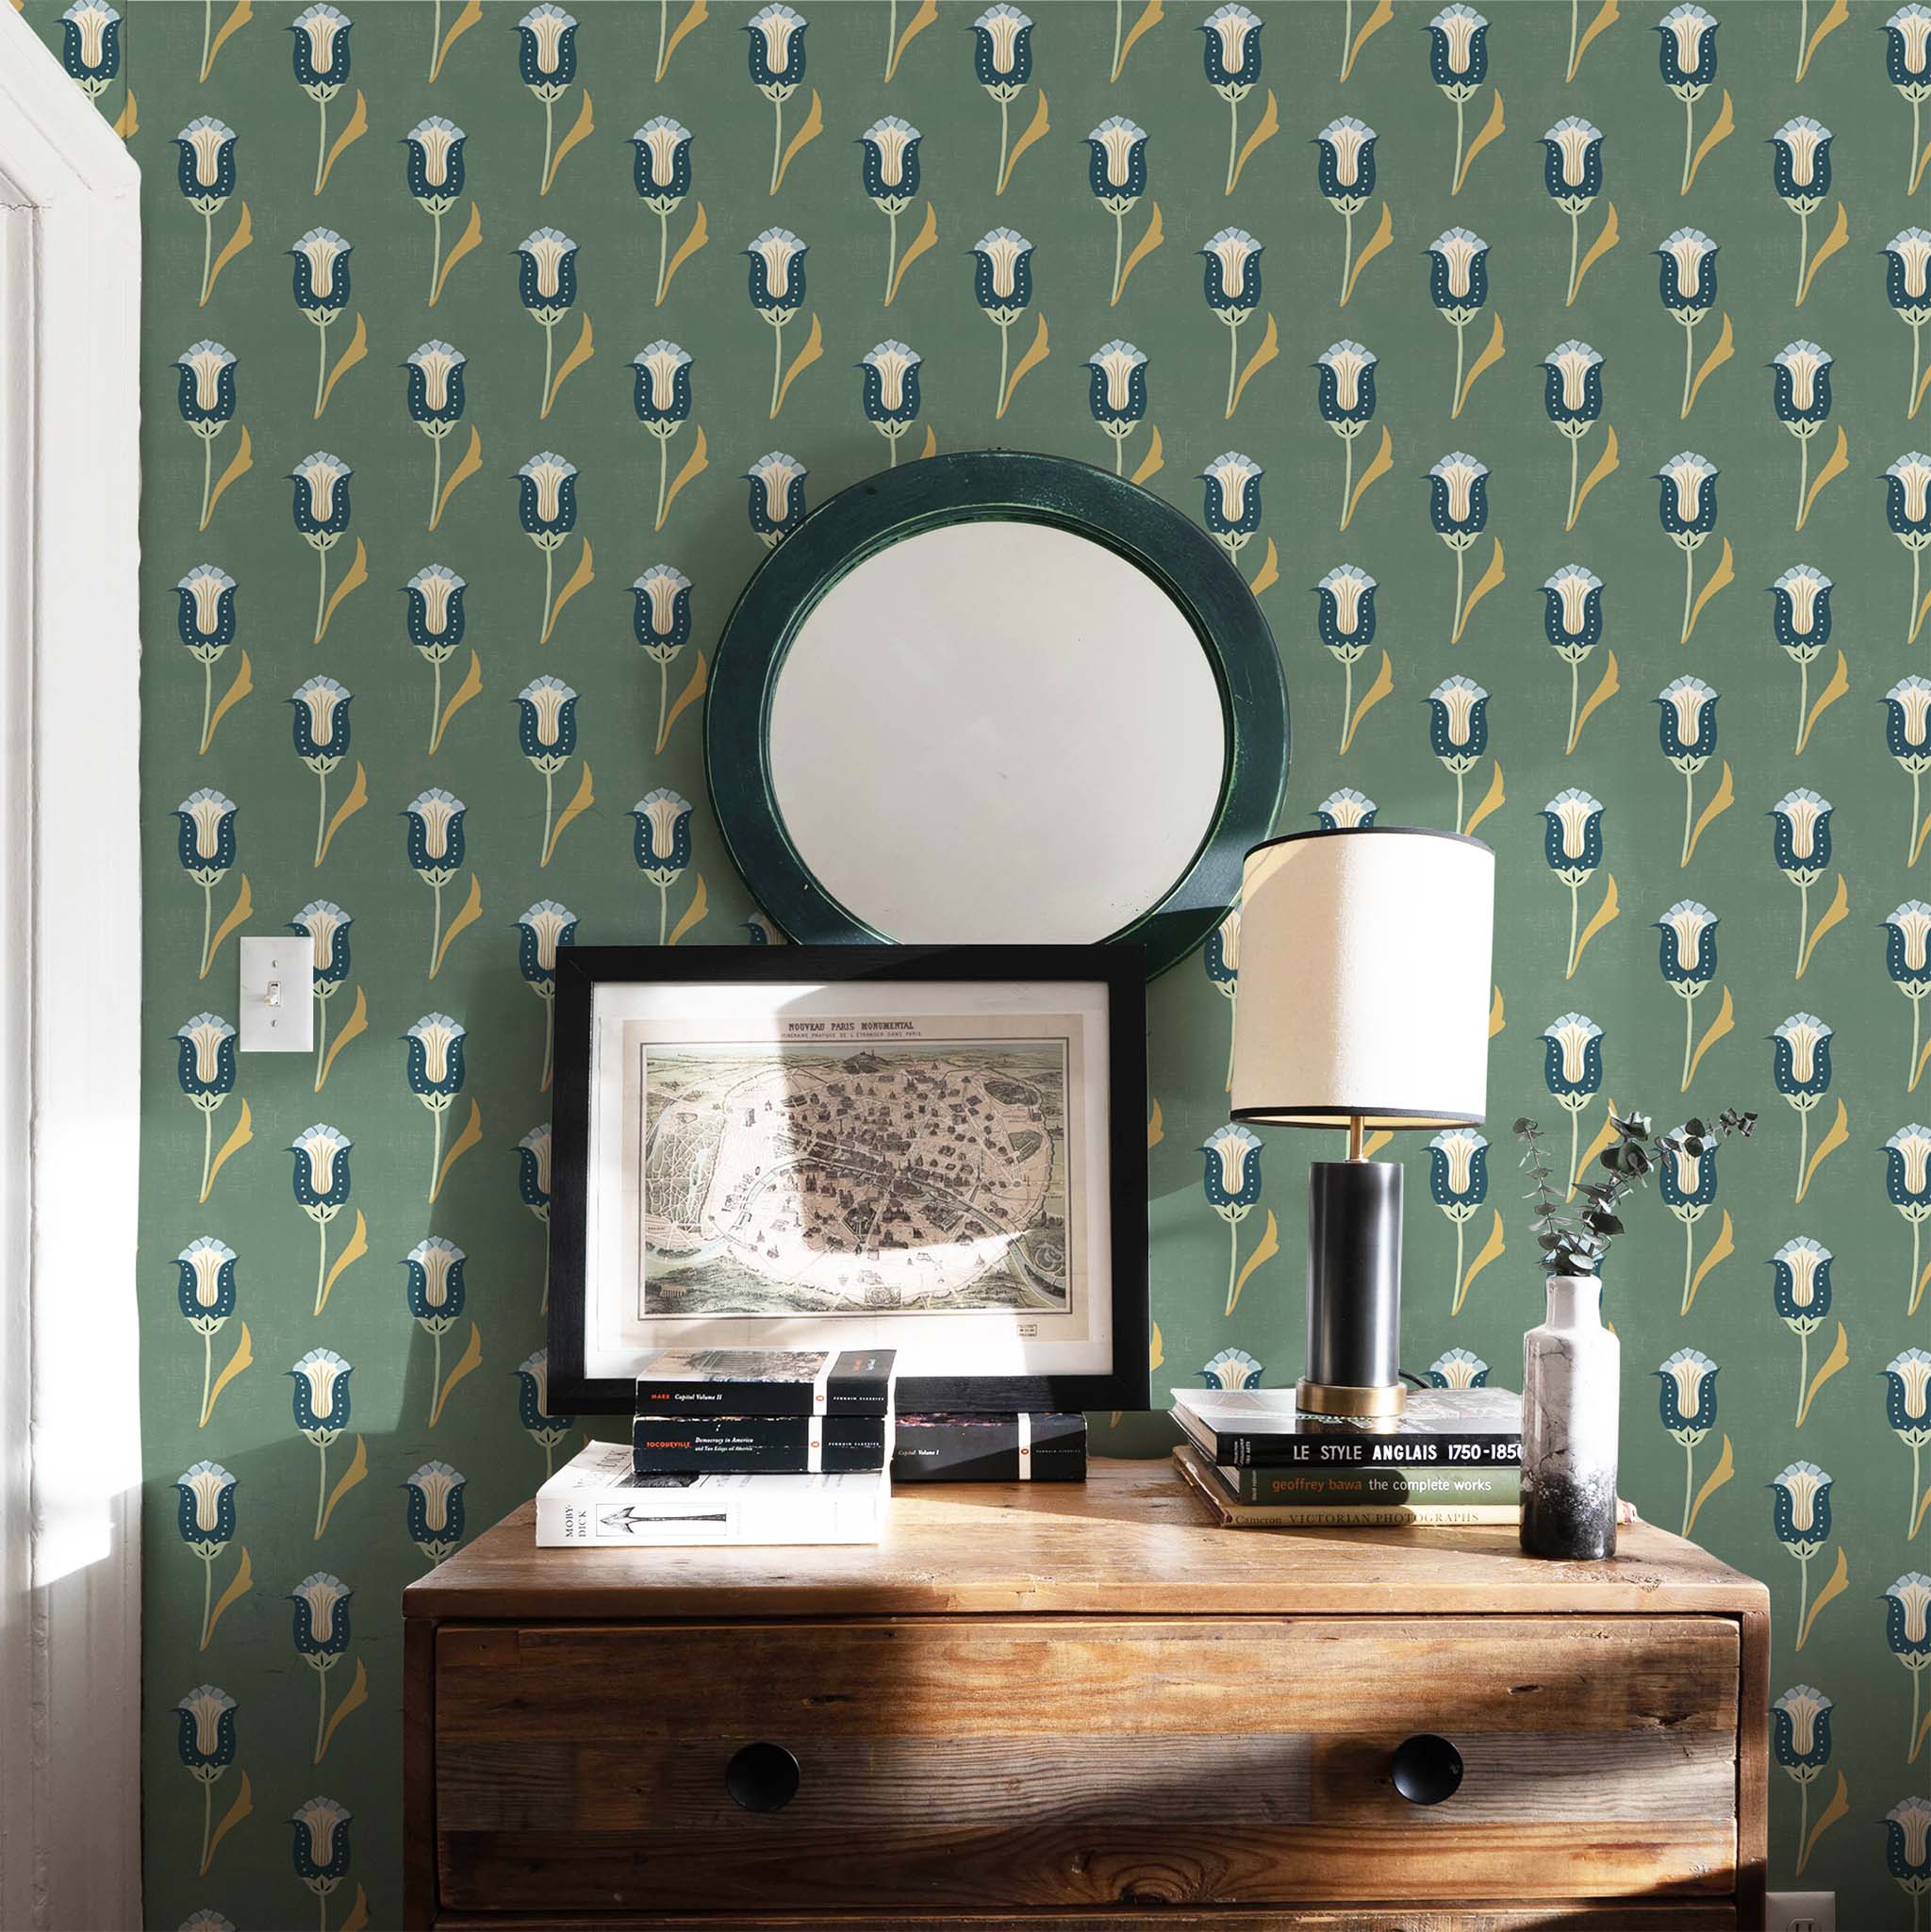 Abstract floral moss green and teal printed wallpaper on a wall with a green mirror hung on the wall and a brown dresser stacked with books